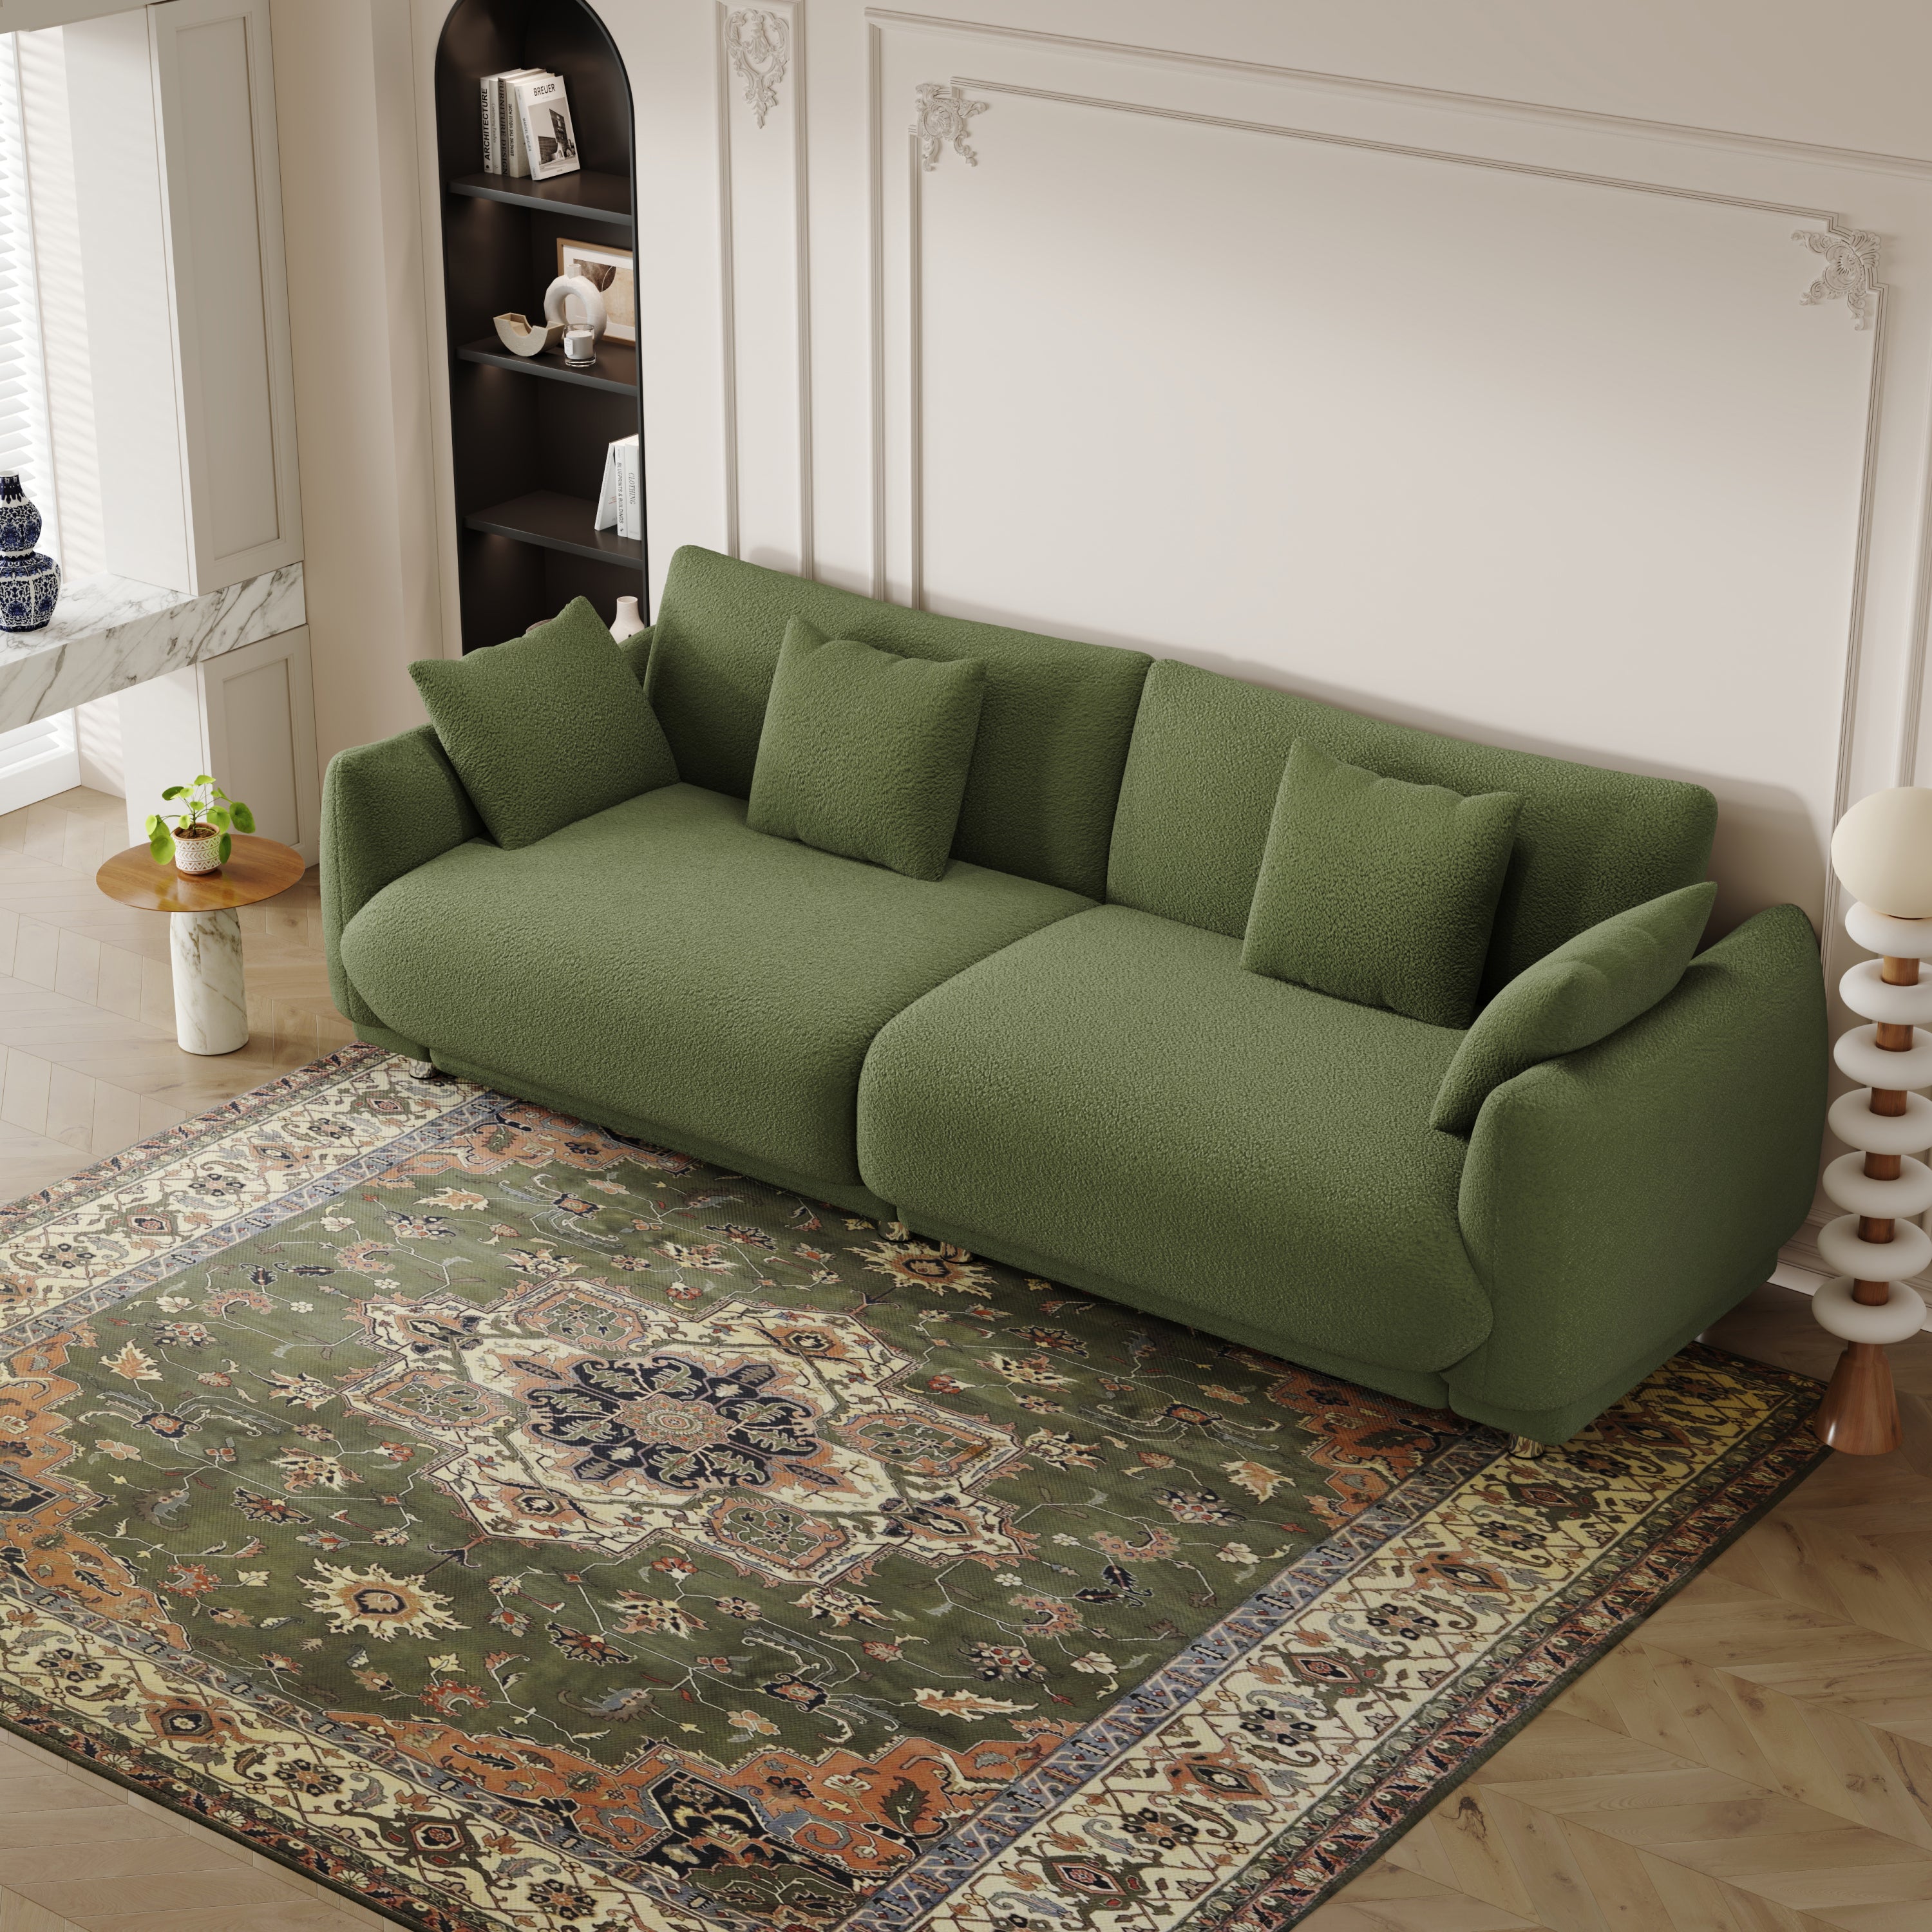 🆓🚛 86.6 Teddy Wool Sofa With 4 Throw Pillows, Green